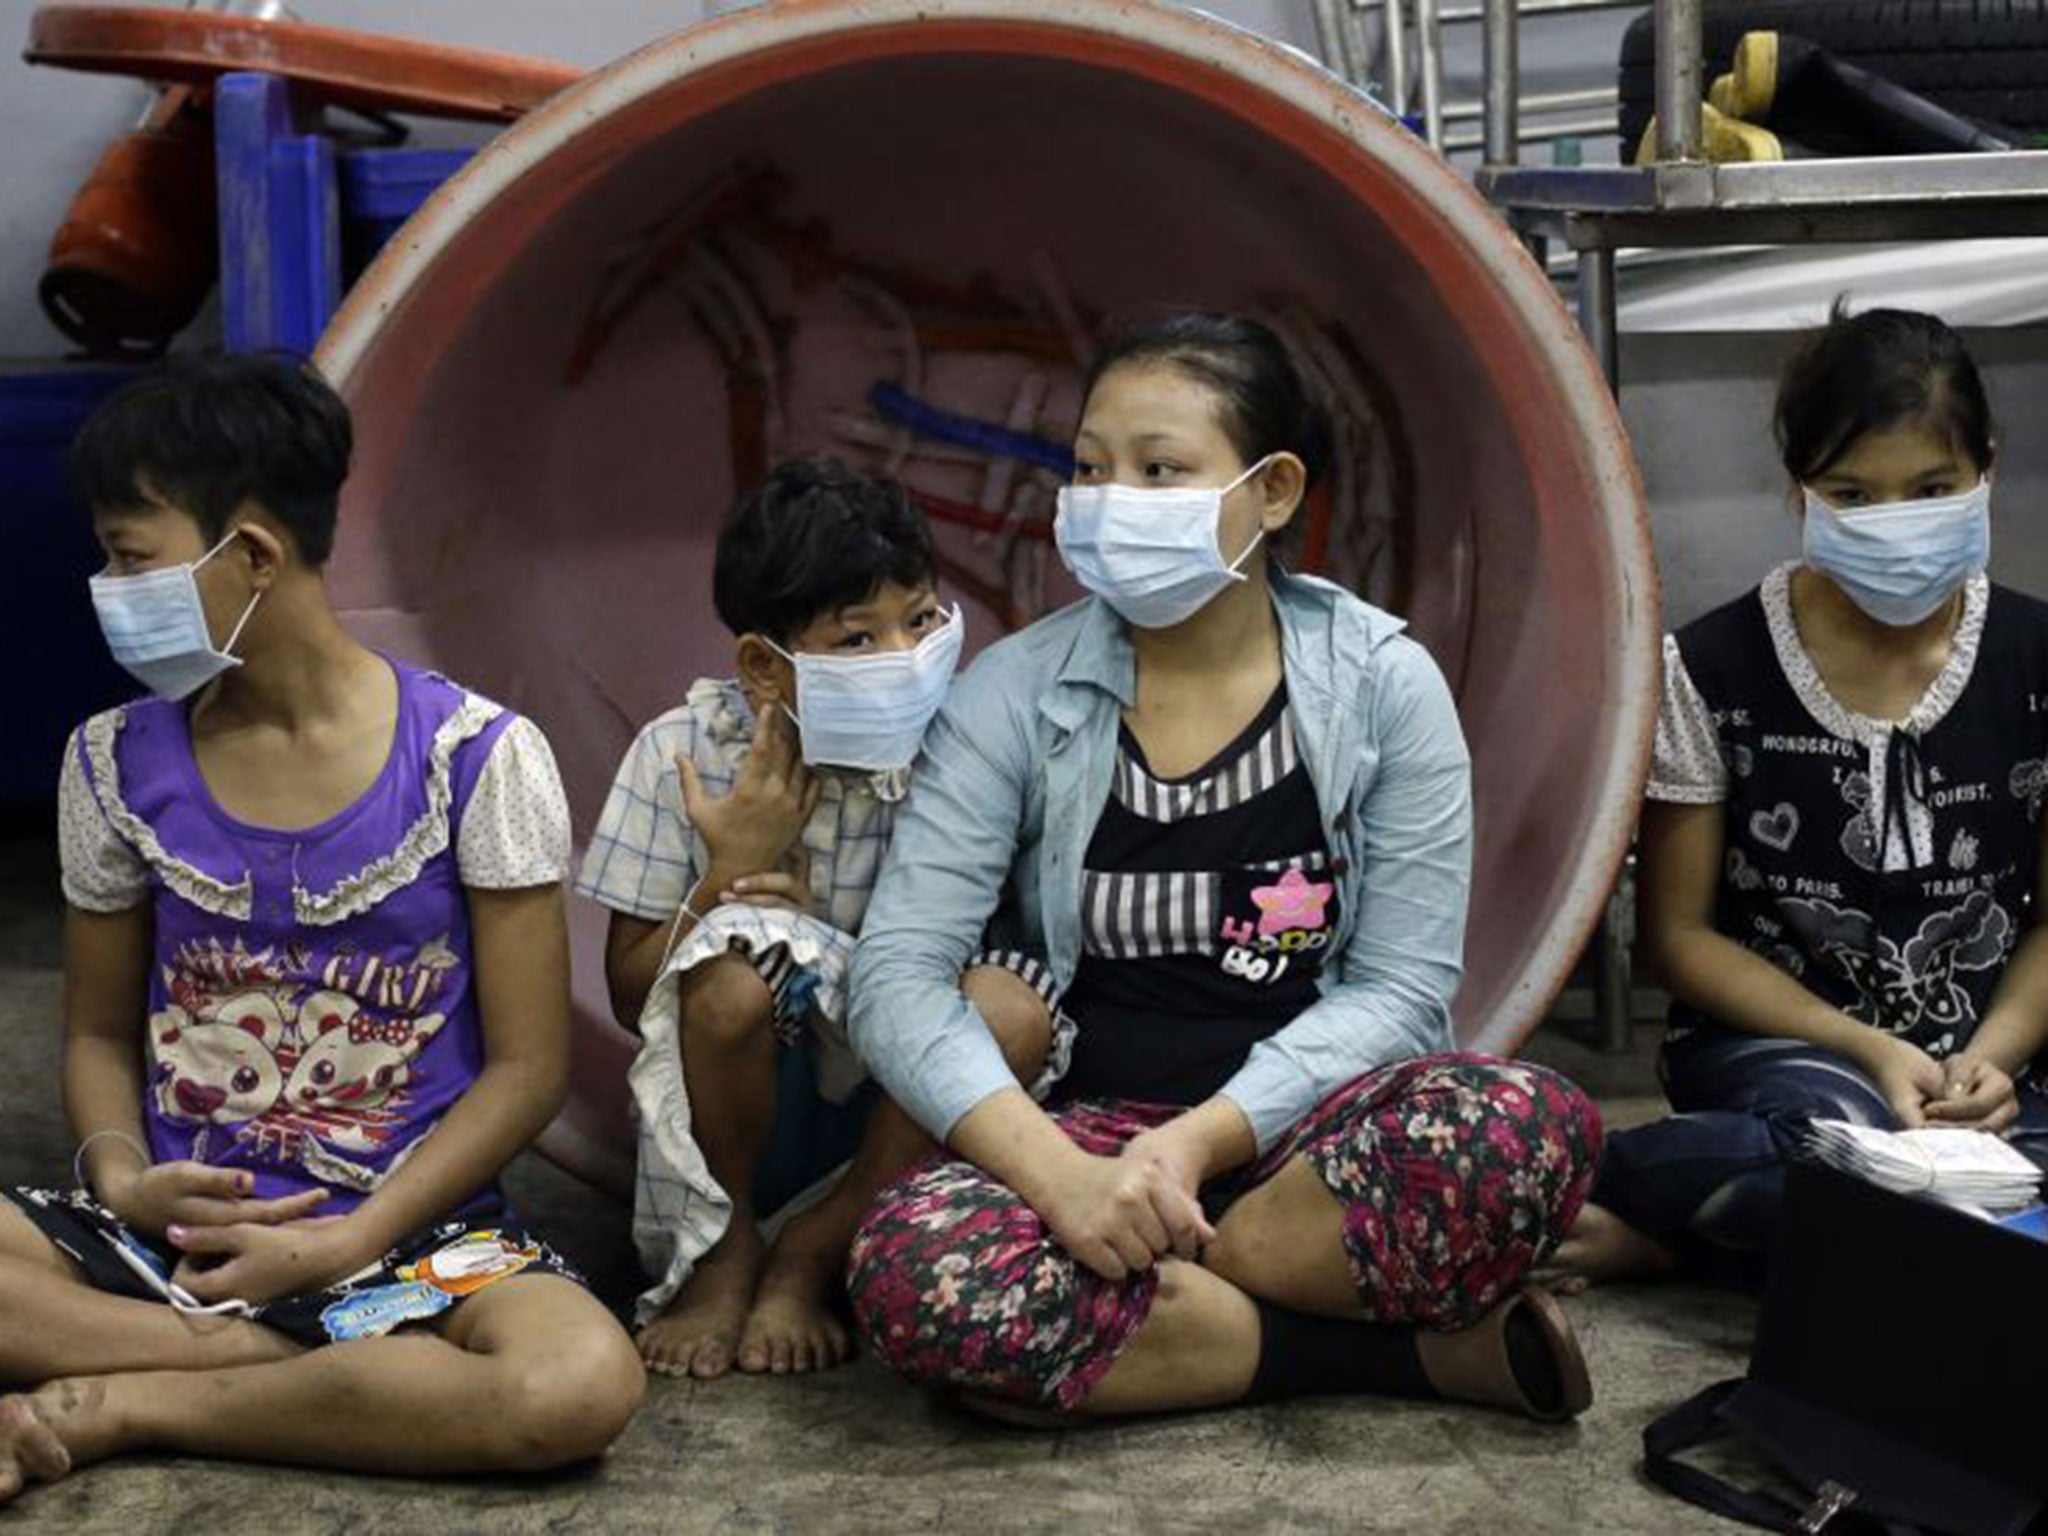 Eae Hpaw, 16, center, an undocumented child worker, sits with children and teenagers to be registered by officials during a raid on a shrimp shed in Samut Sakhon, Thailand.